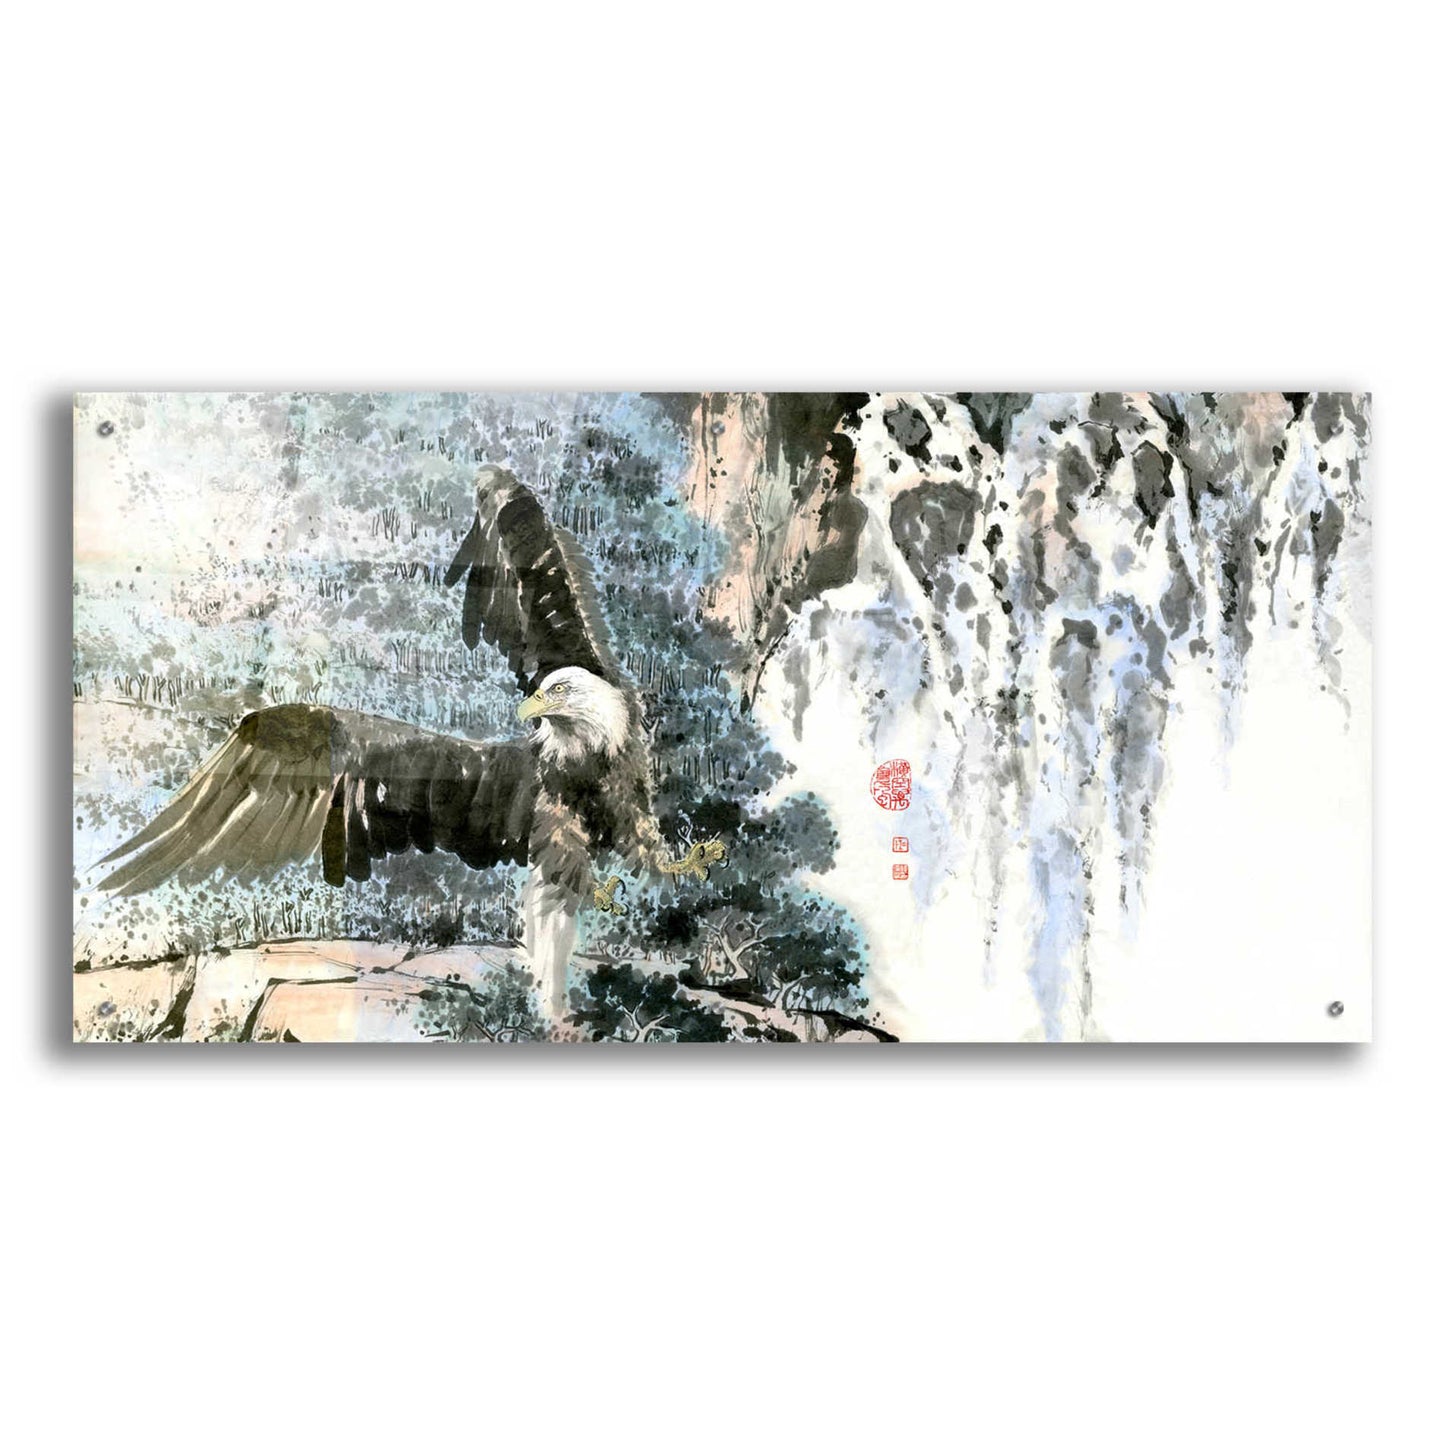 Epic Art 'Bald Eagle Over Cascading Waterfalls' by River Han, Acrylic Glass Wall Art,48x24